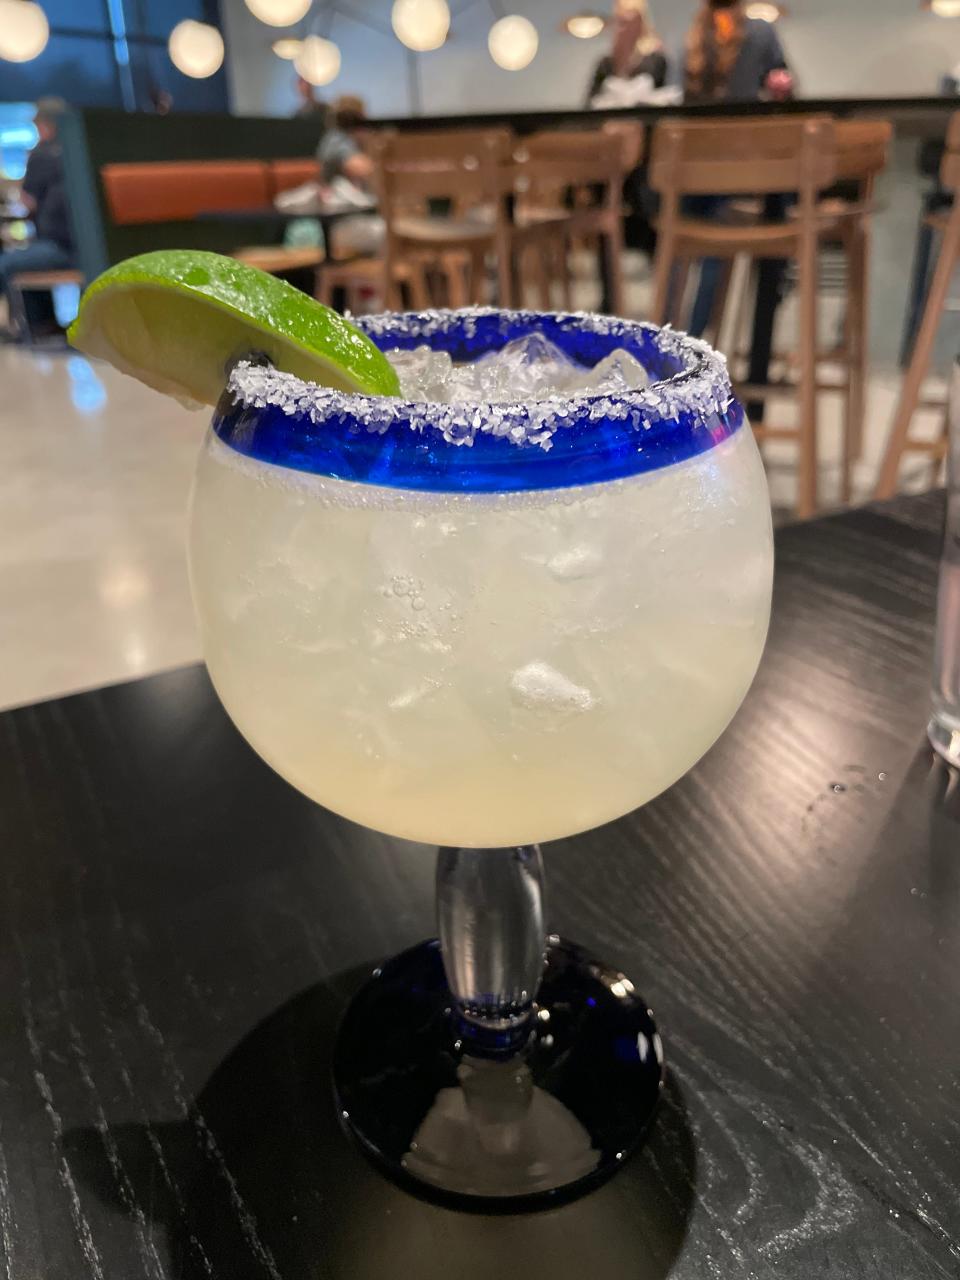 With its rocks-and-salt preparation, the skinny margarita at Celestina Mexican Crafted in West Knoxville is a great choice.